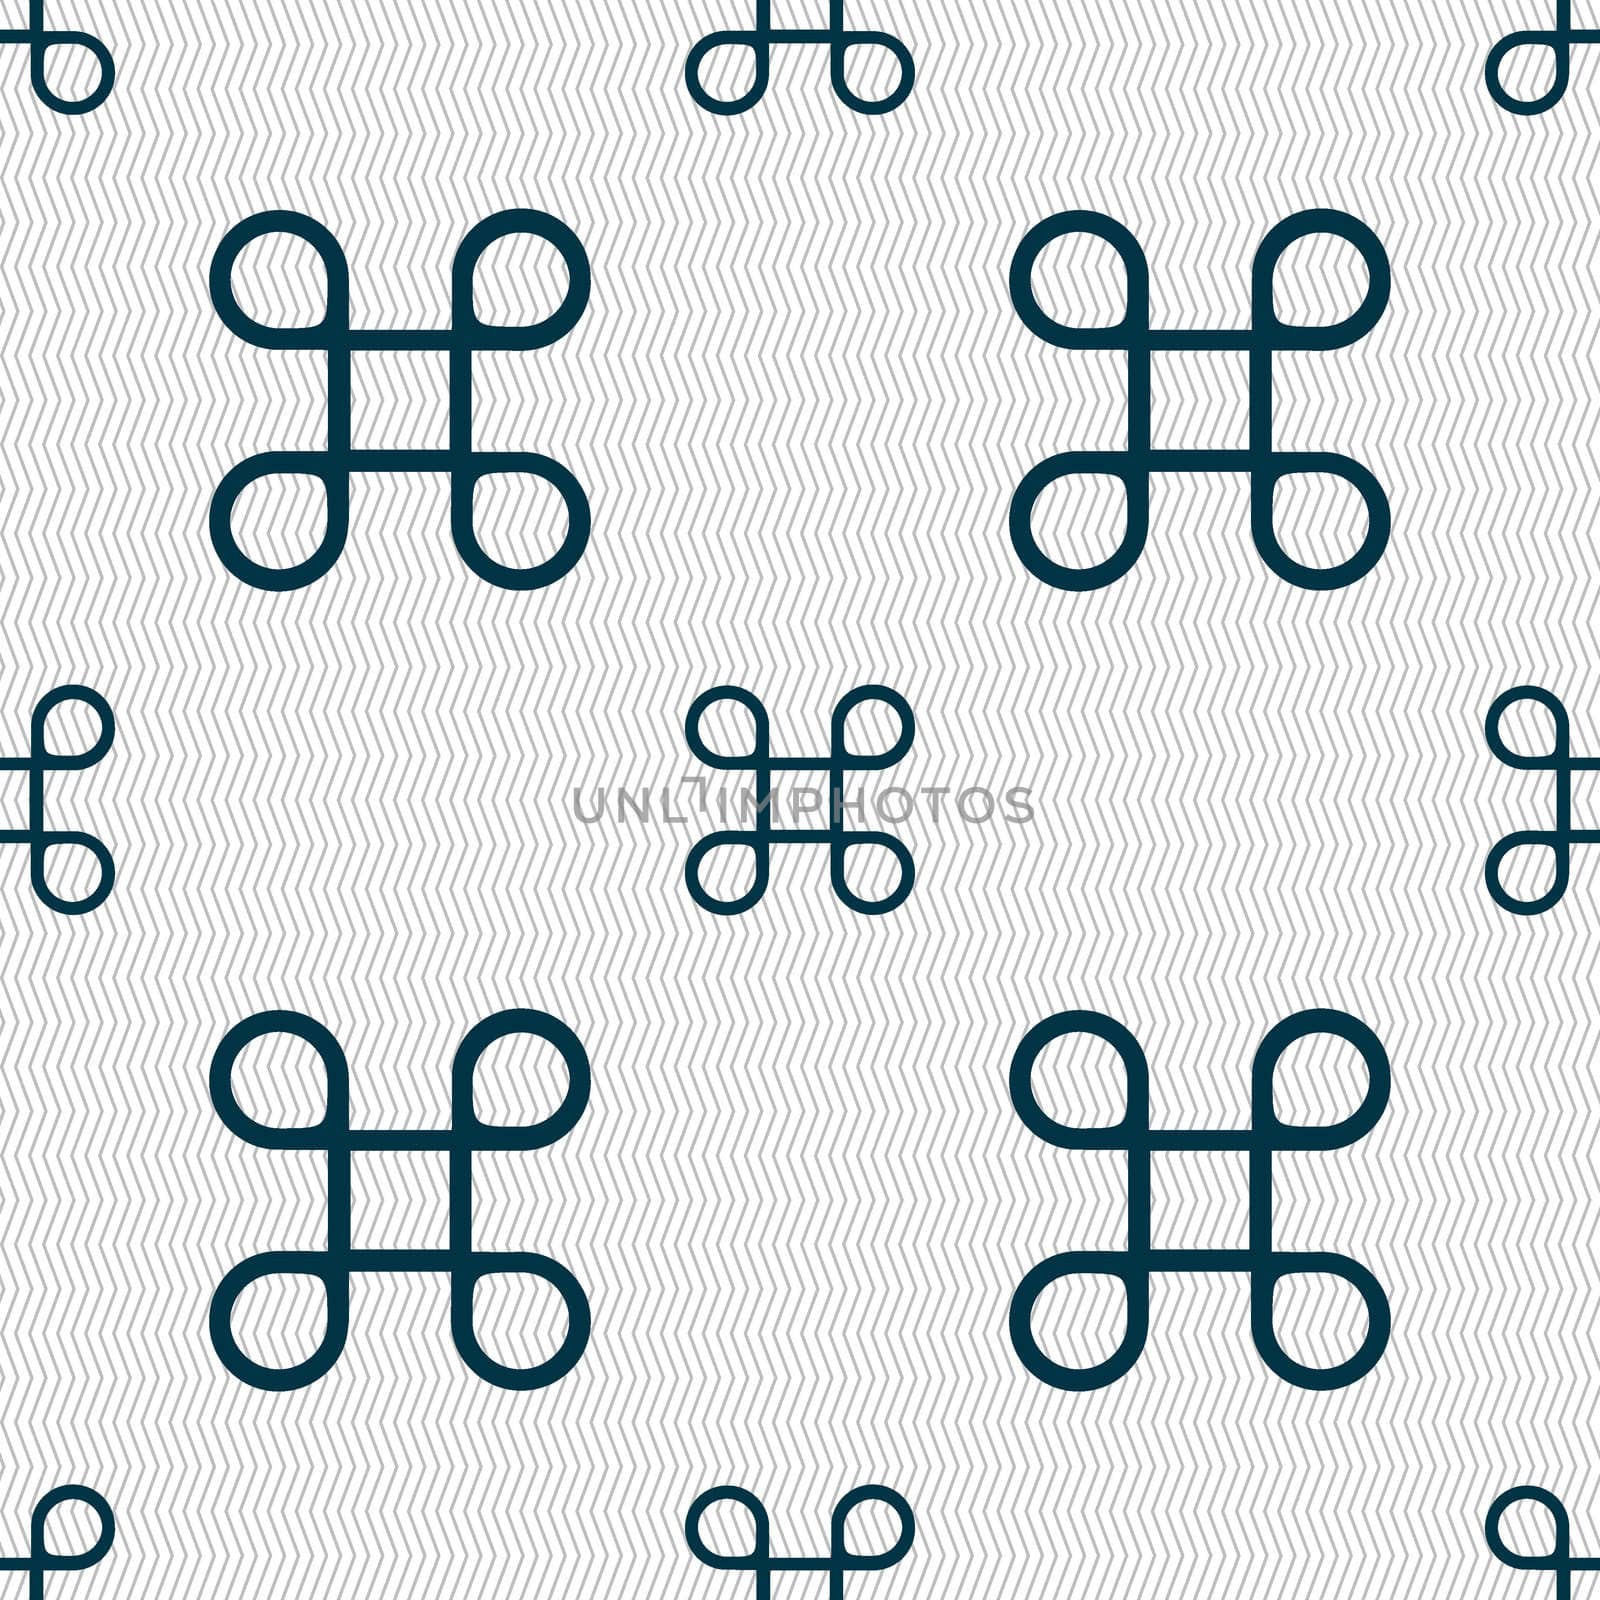 Keyboard Maestro icon. Seamless abstract background with geometric shapes. illustration